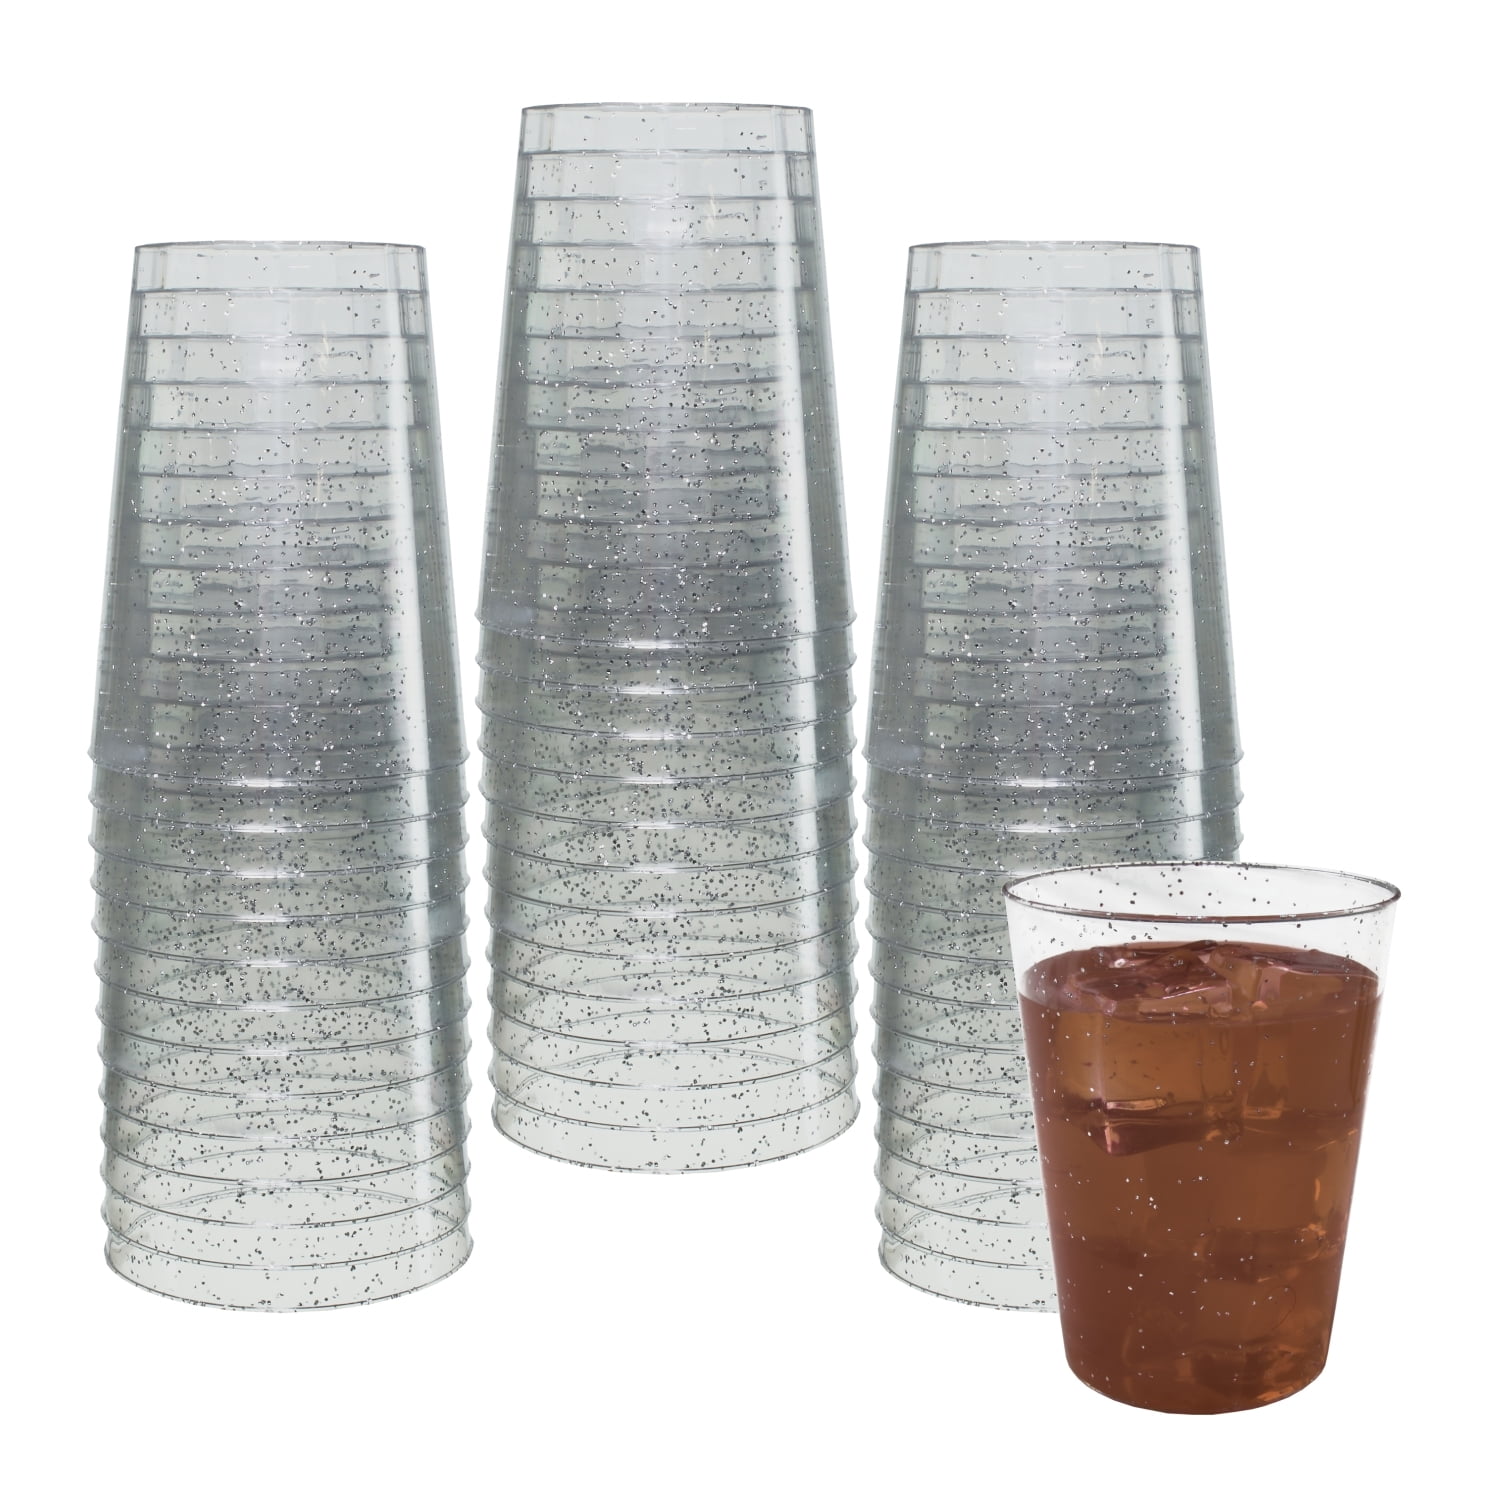 Amscan Big Party Pack Plastic Tumblers 5oz 88 Per Package-Clear 156080